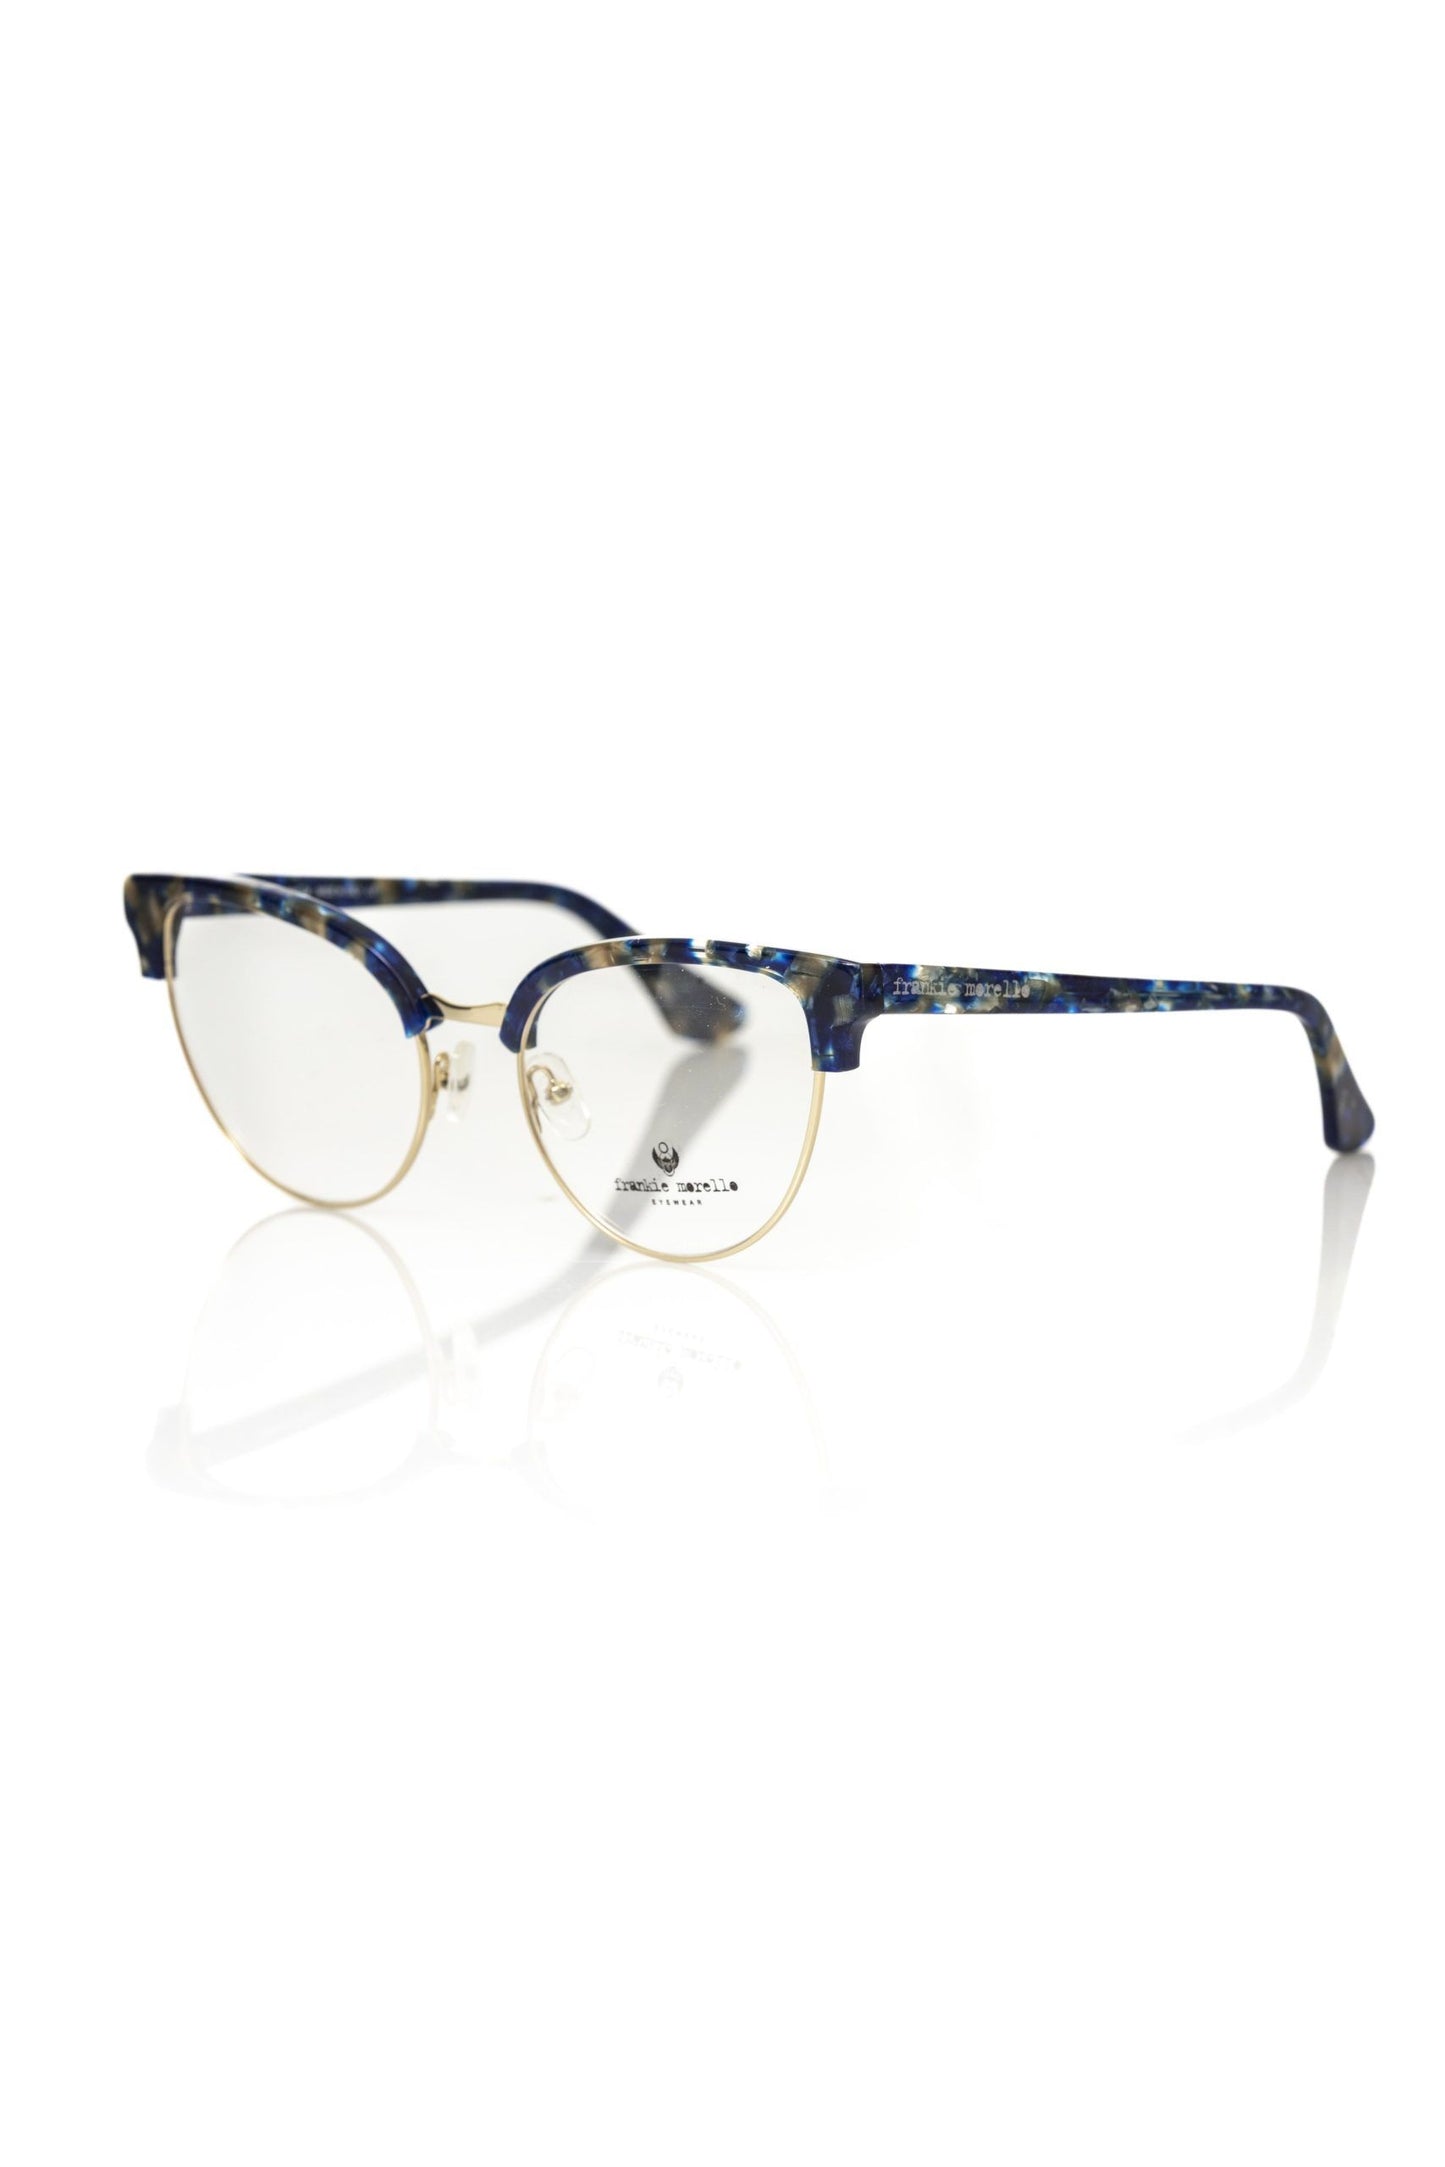 Frankie Morello FRMO-22112 Blue Metallic Fibre Frames - Designed by Frankie Morello Available to Buy at a Discounted Price on Moon Behind The Hill Online Designer Discount Store